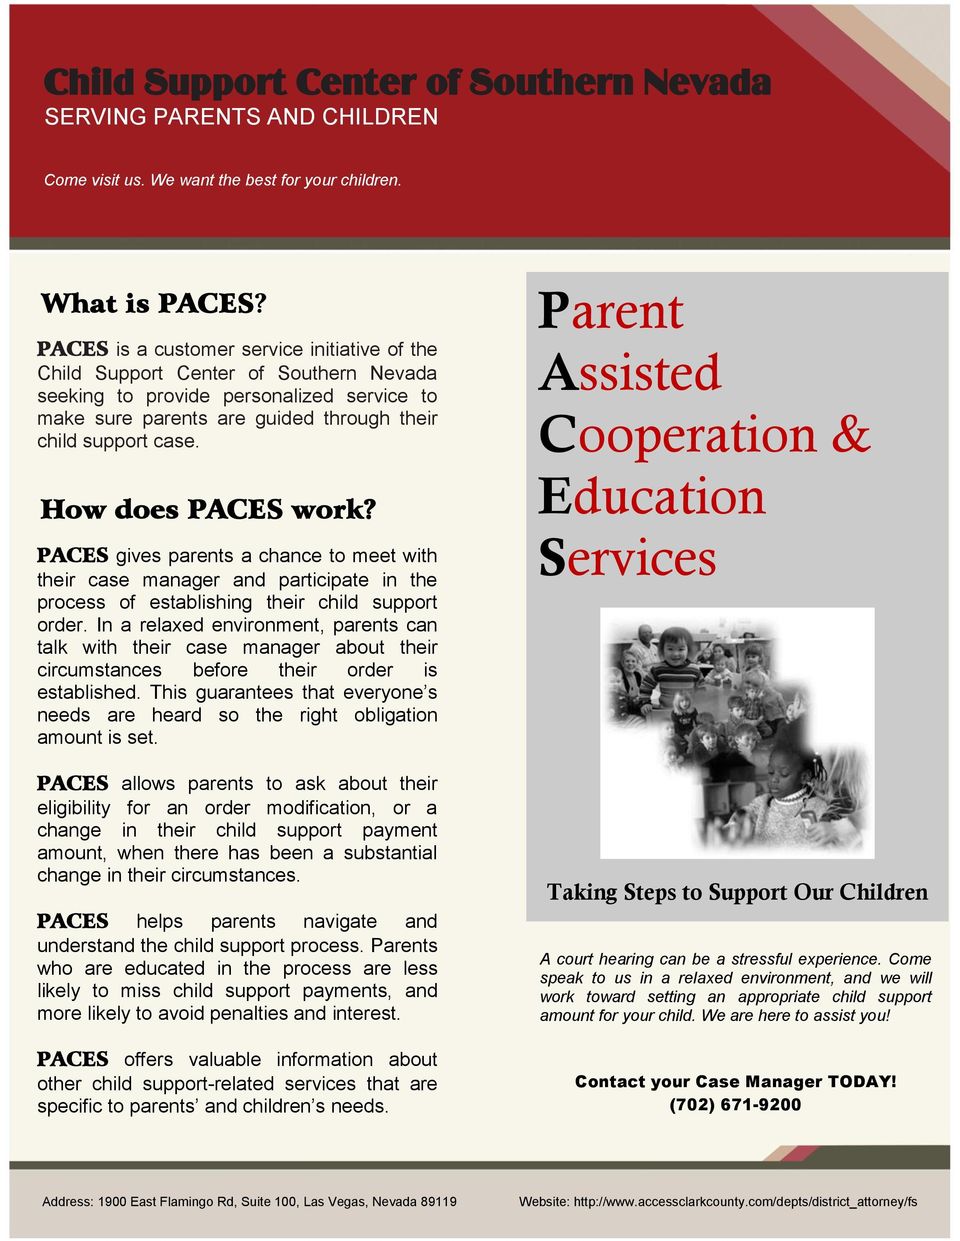 How does PACES work? PACES gives parents a chance to meet with their case manager and participate in the process of establishing their child support order.